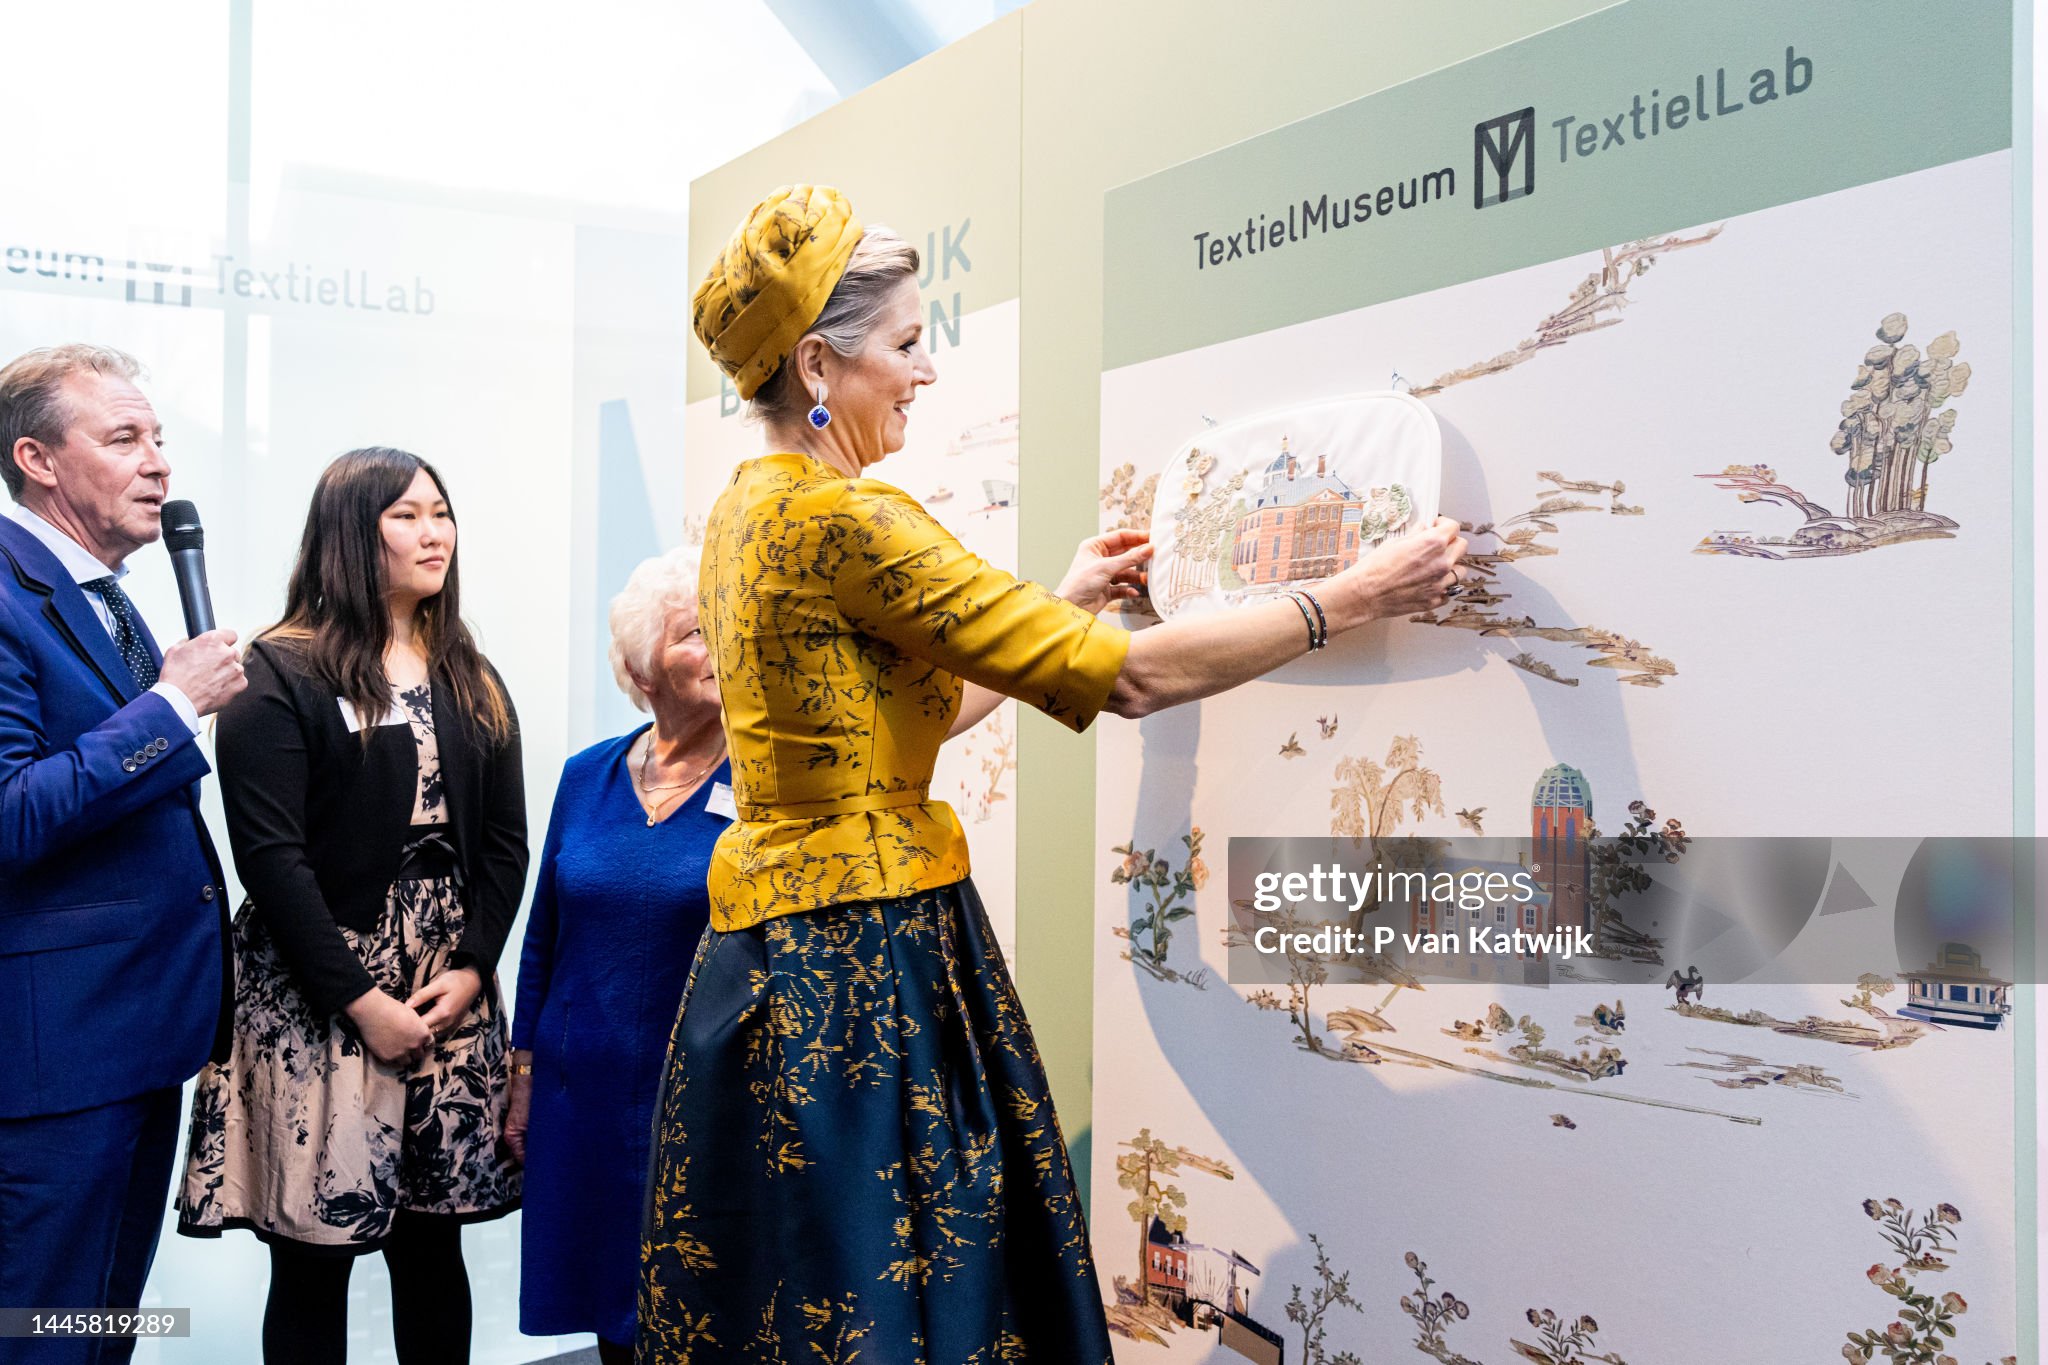 queen-maxima-of-the-netherlands-visits-textile-museum-to-present-her-new-curtains-for-palace.jpg?s=2048x2048&w=gi&k=20&c=VItTgDAQDgMBb-jQeN-8H_Mct9v7pZDzJ-h1Qz2mdFU=